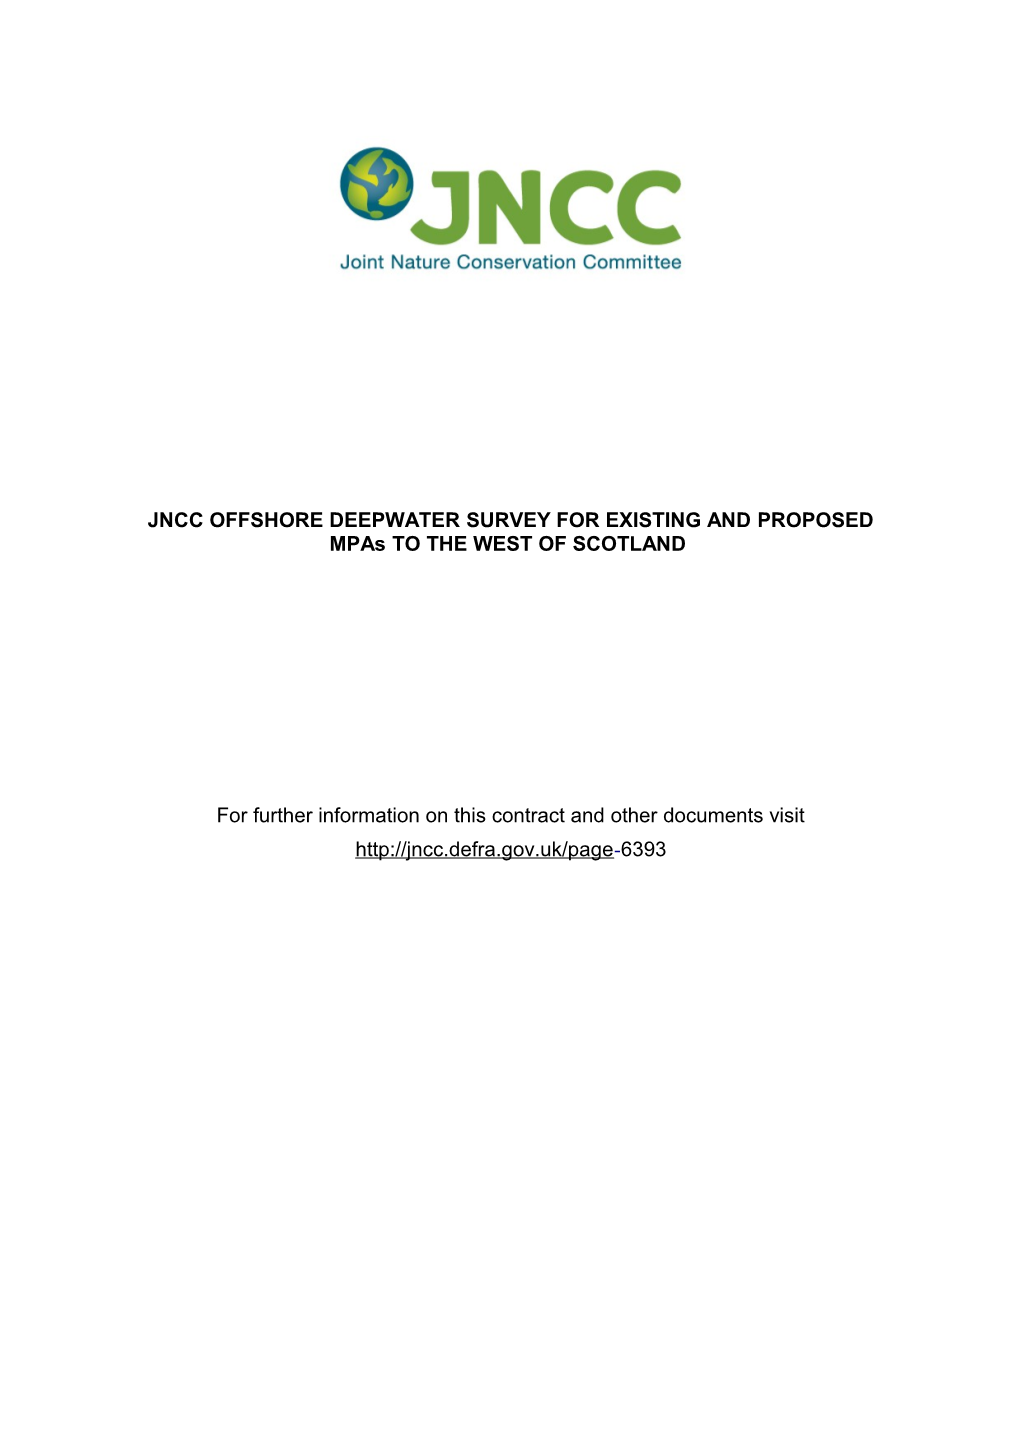 JNCC OFFSHORE DEEPWATER SURVEY for EXISTING and PROPOSED Mpas to the WEST of SCOTLAND